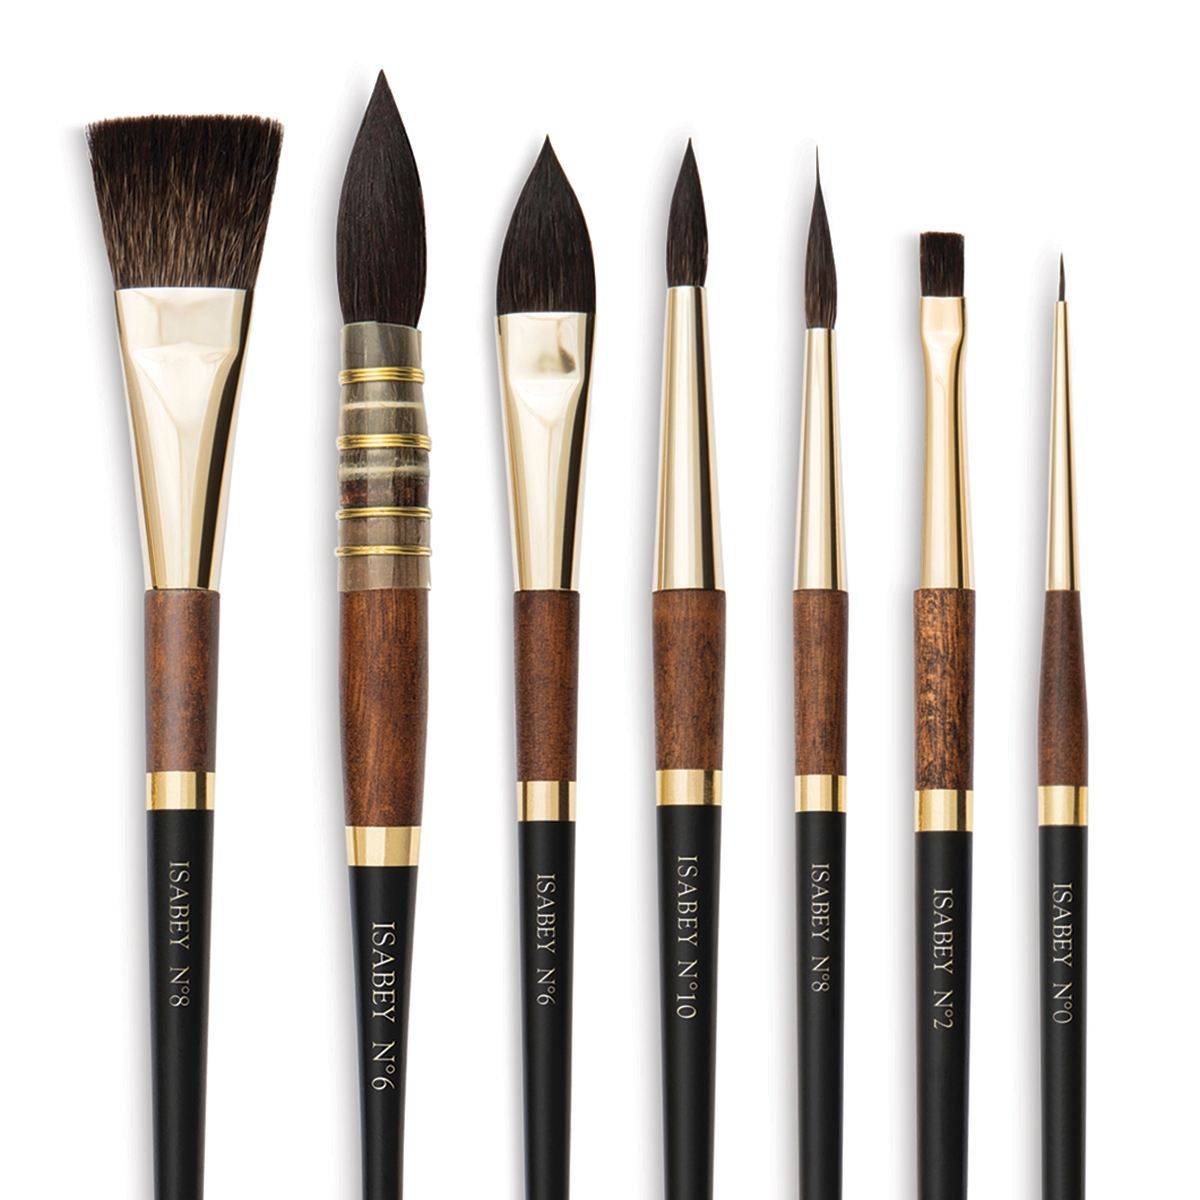 Princeton Velvetouch Brushes - Choose Your Brush - Page 1 of 2